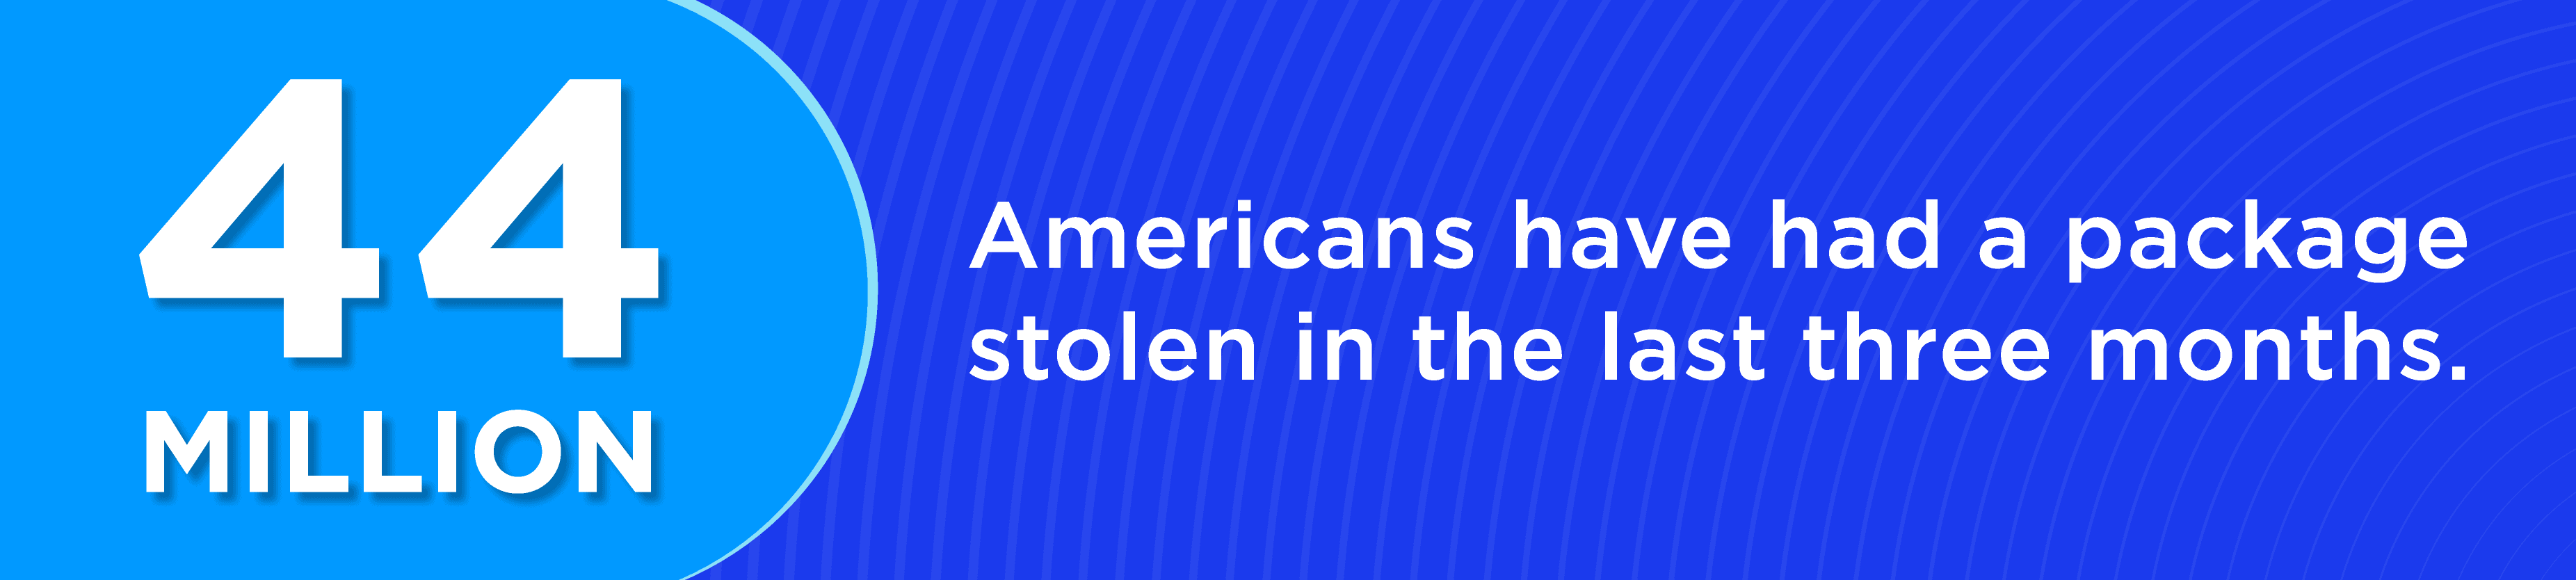 44 million Americans have had a package stolen in the last three months.